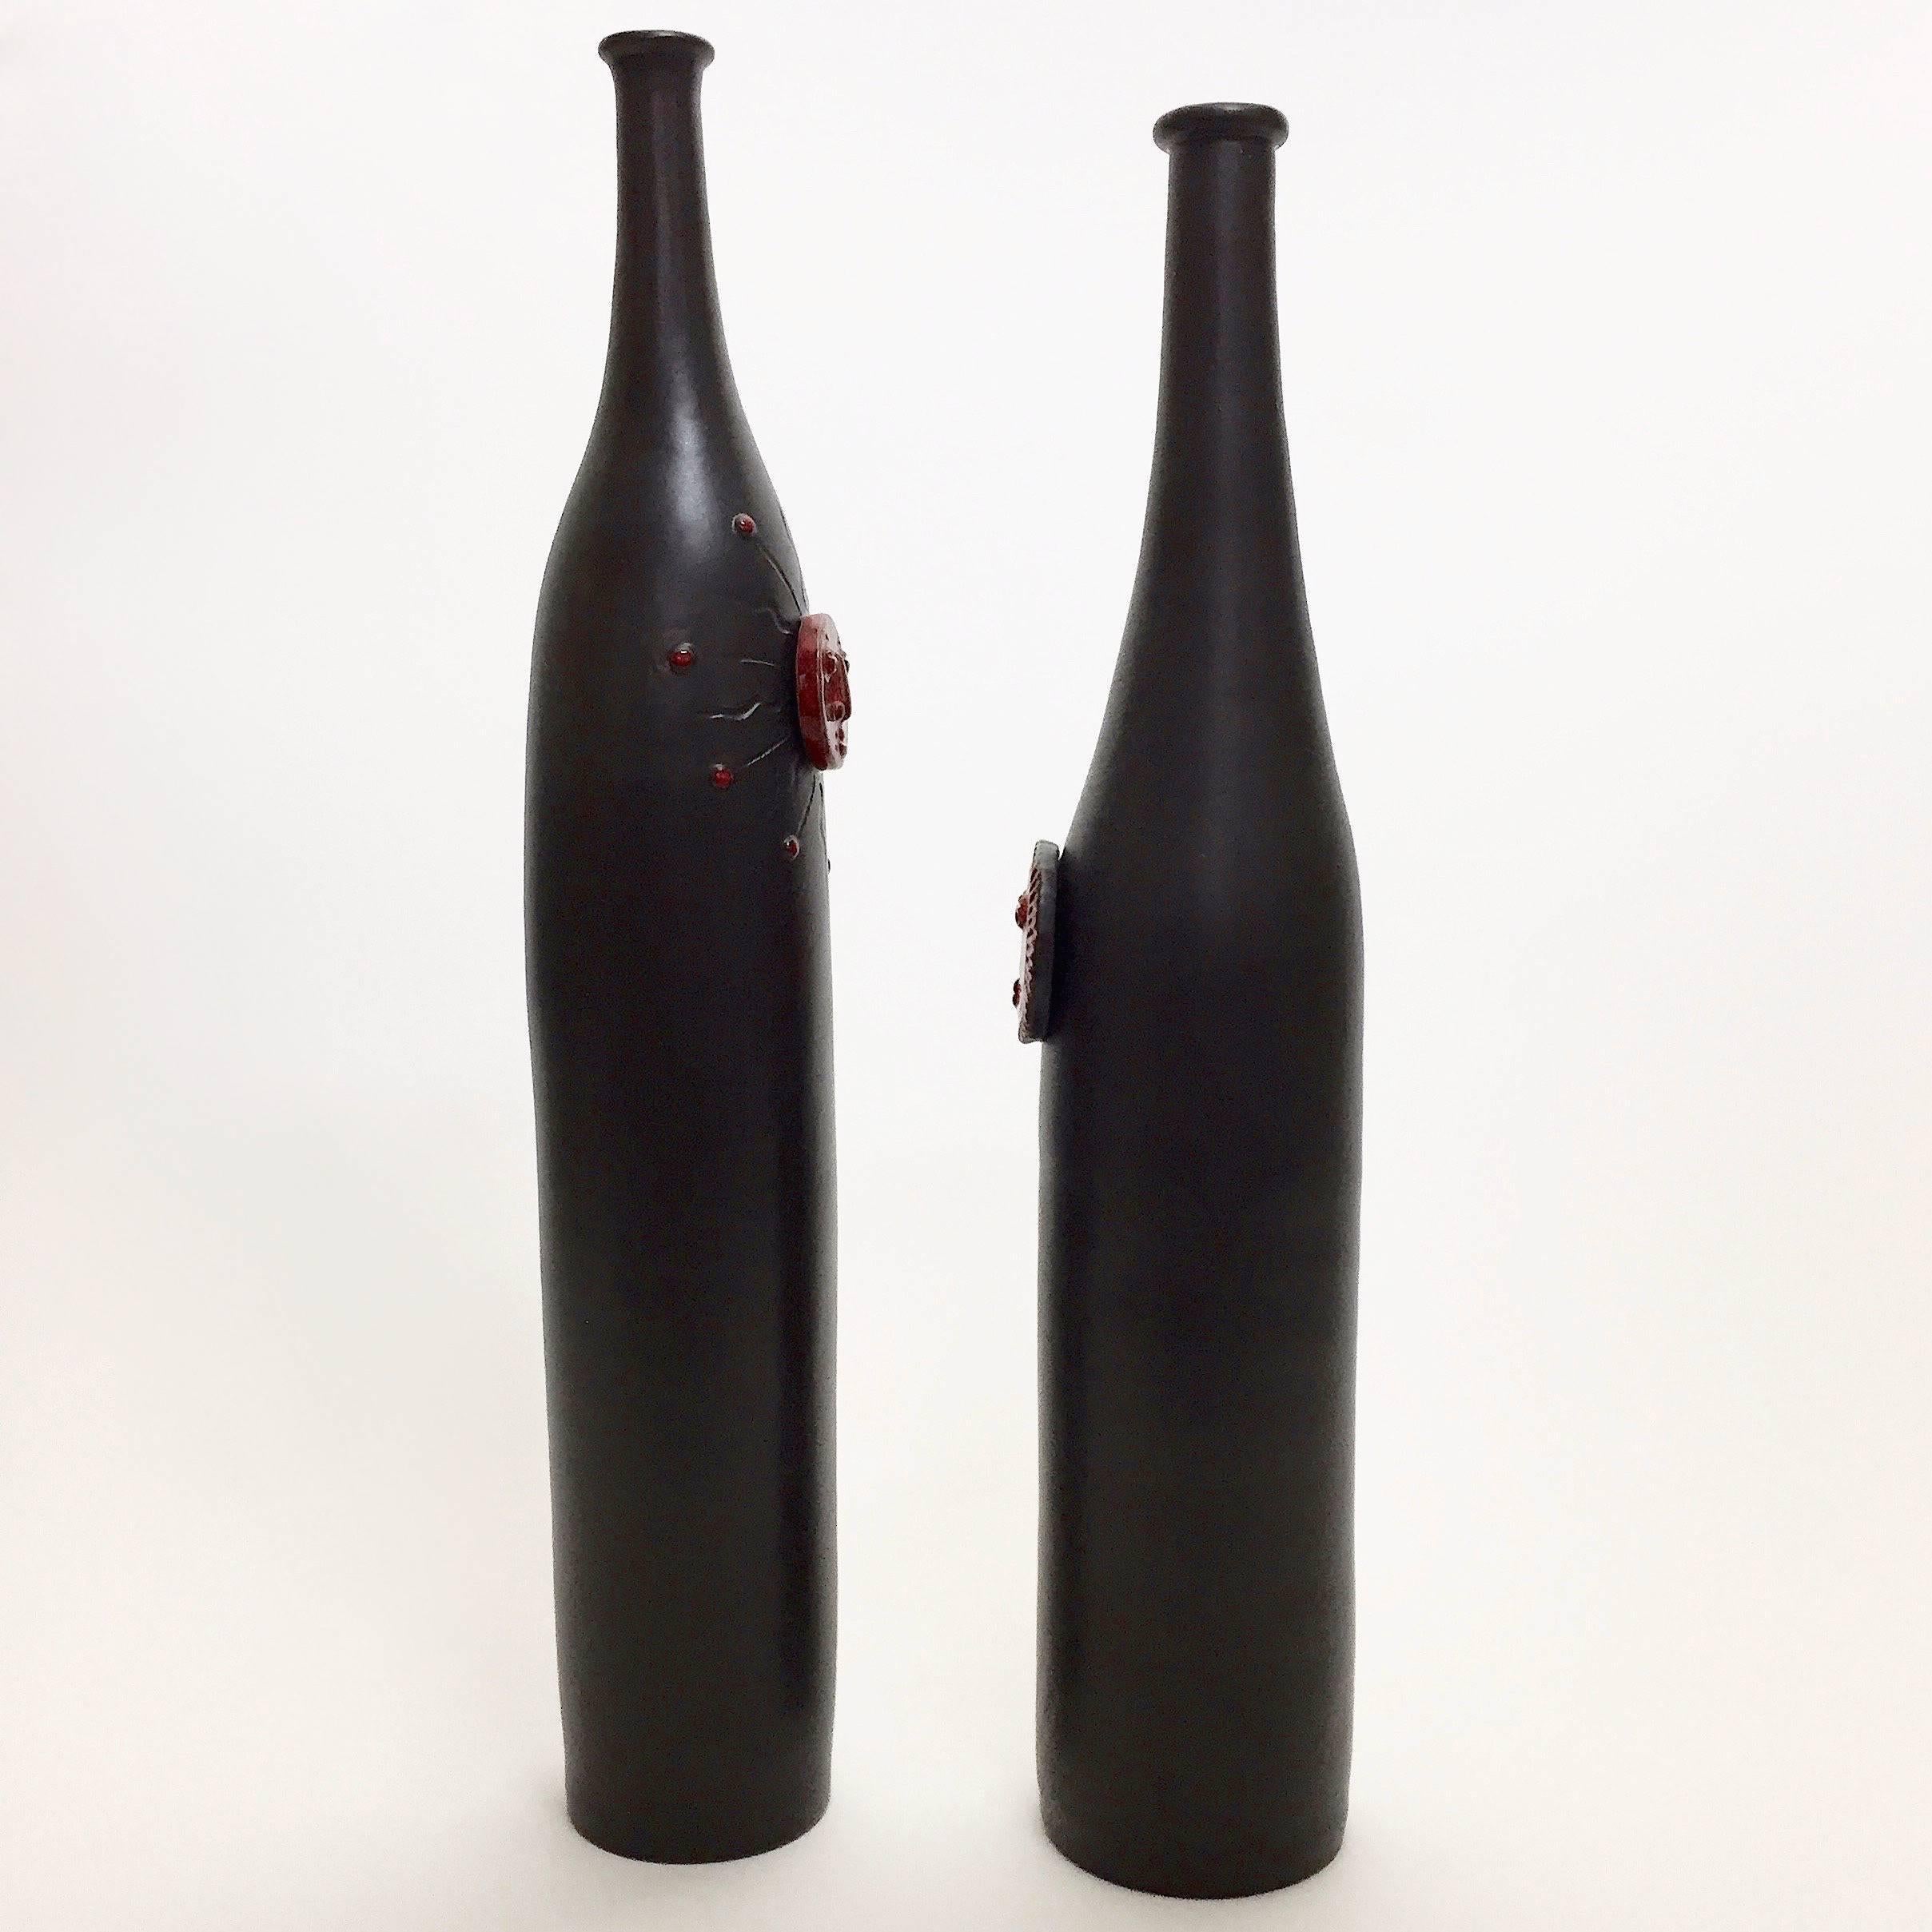 Pair of ceramic vases, bottle shaped, glazed in matte black and decorated with glossy red biomorphic medallions in front.
One of a kind handmade pieces signed by the French ceramicists, the DaLo.

Dimensions approx. are:
- Large: H 47.5 cm, D 7